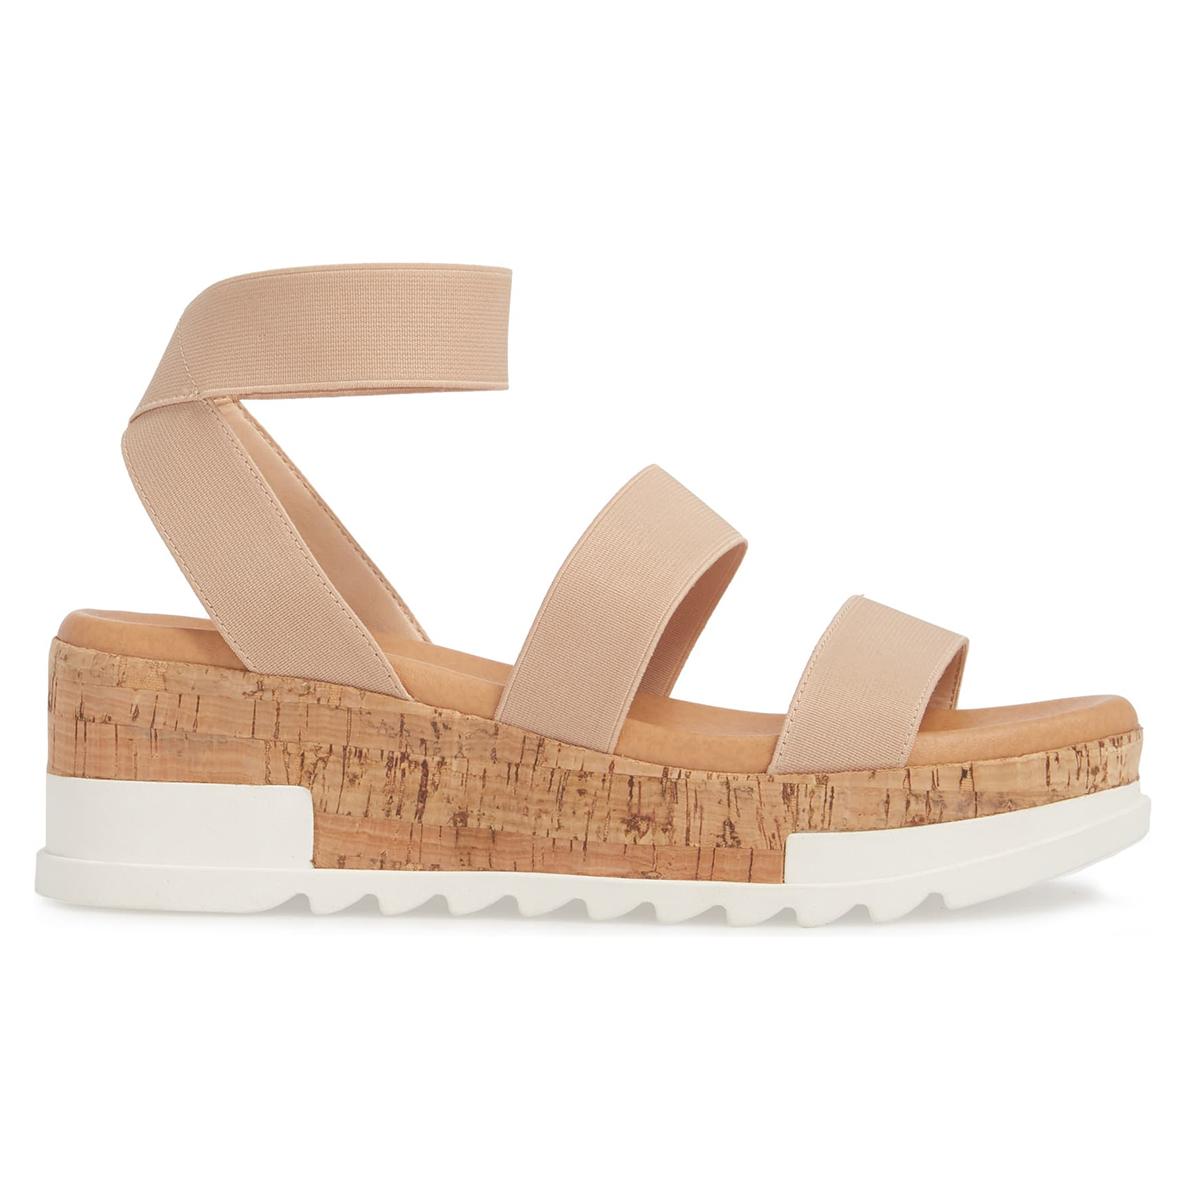 These Steve Madden Sandals Will Upgrade 